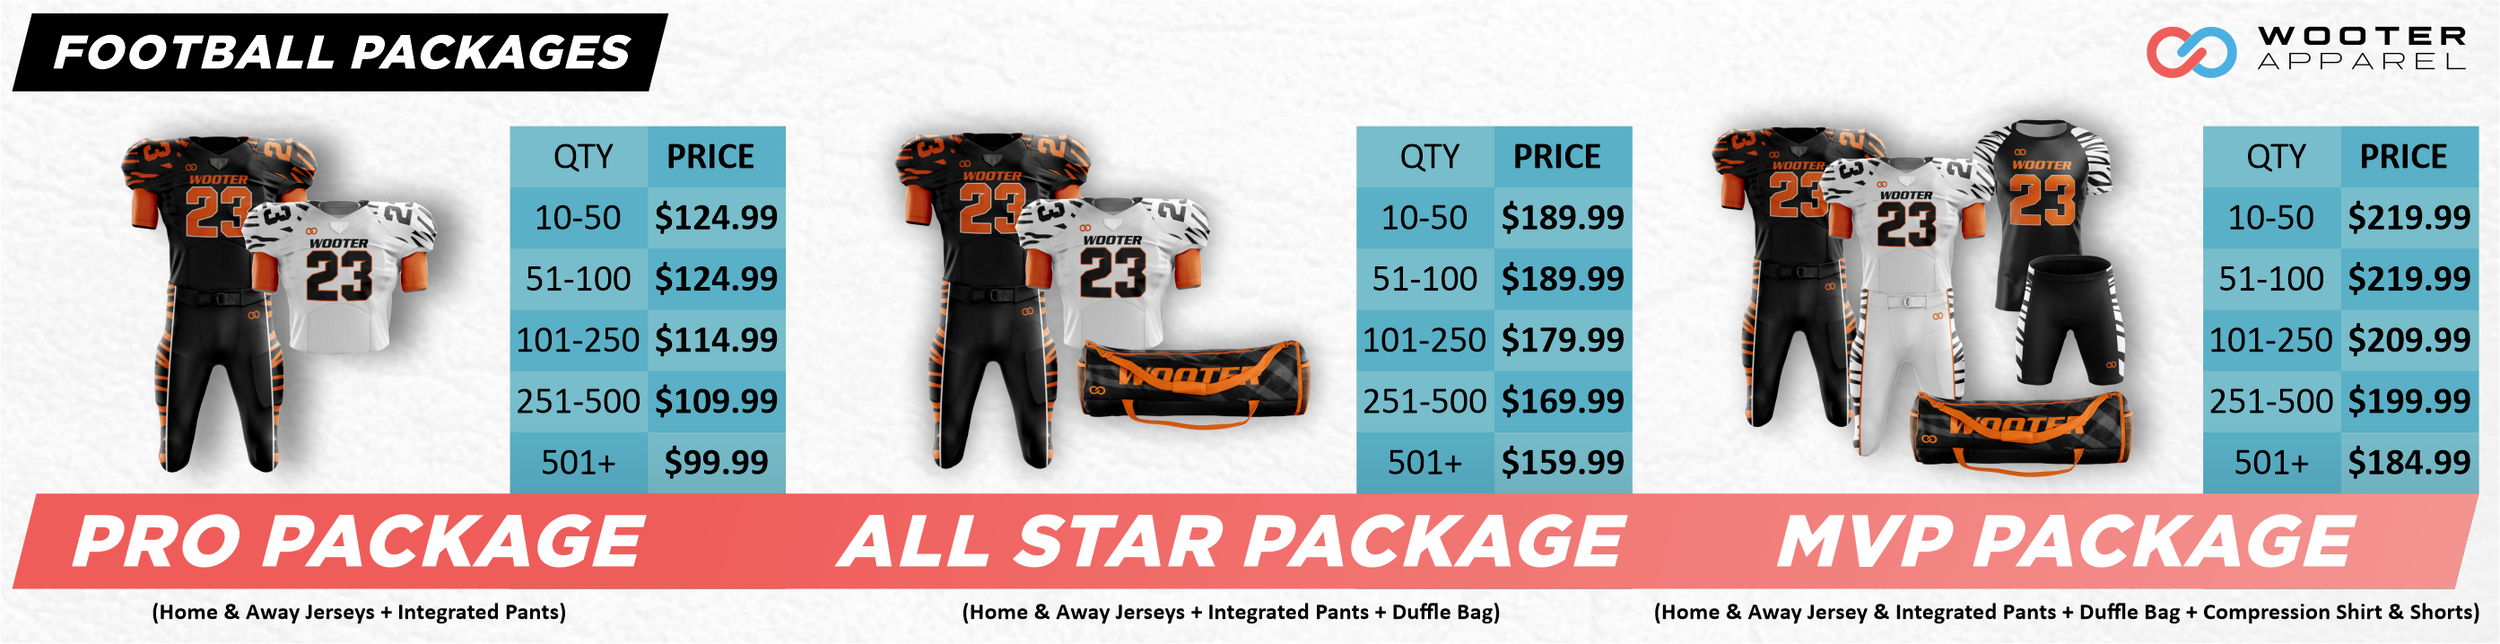 Custom football packages from Wooter Apparel including jerseys, pants, and girdles. Design your team's uniforms with our wide range of colors, sizes, and customizable options.